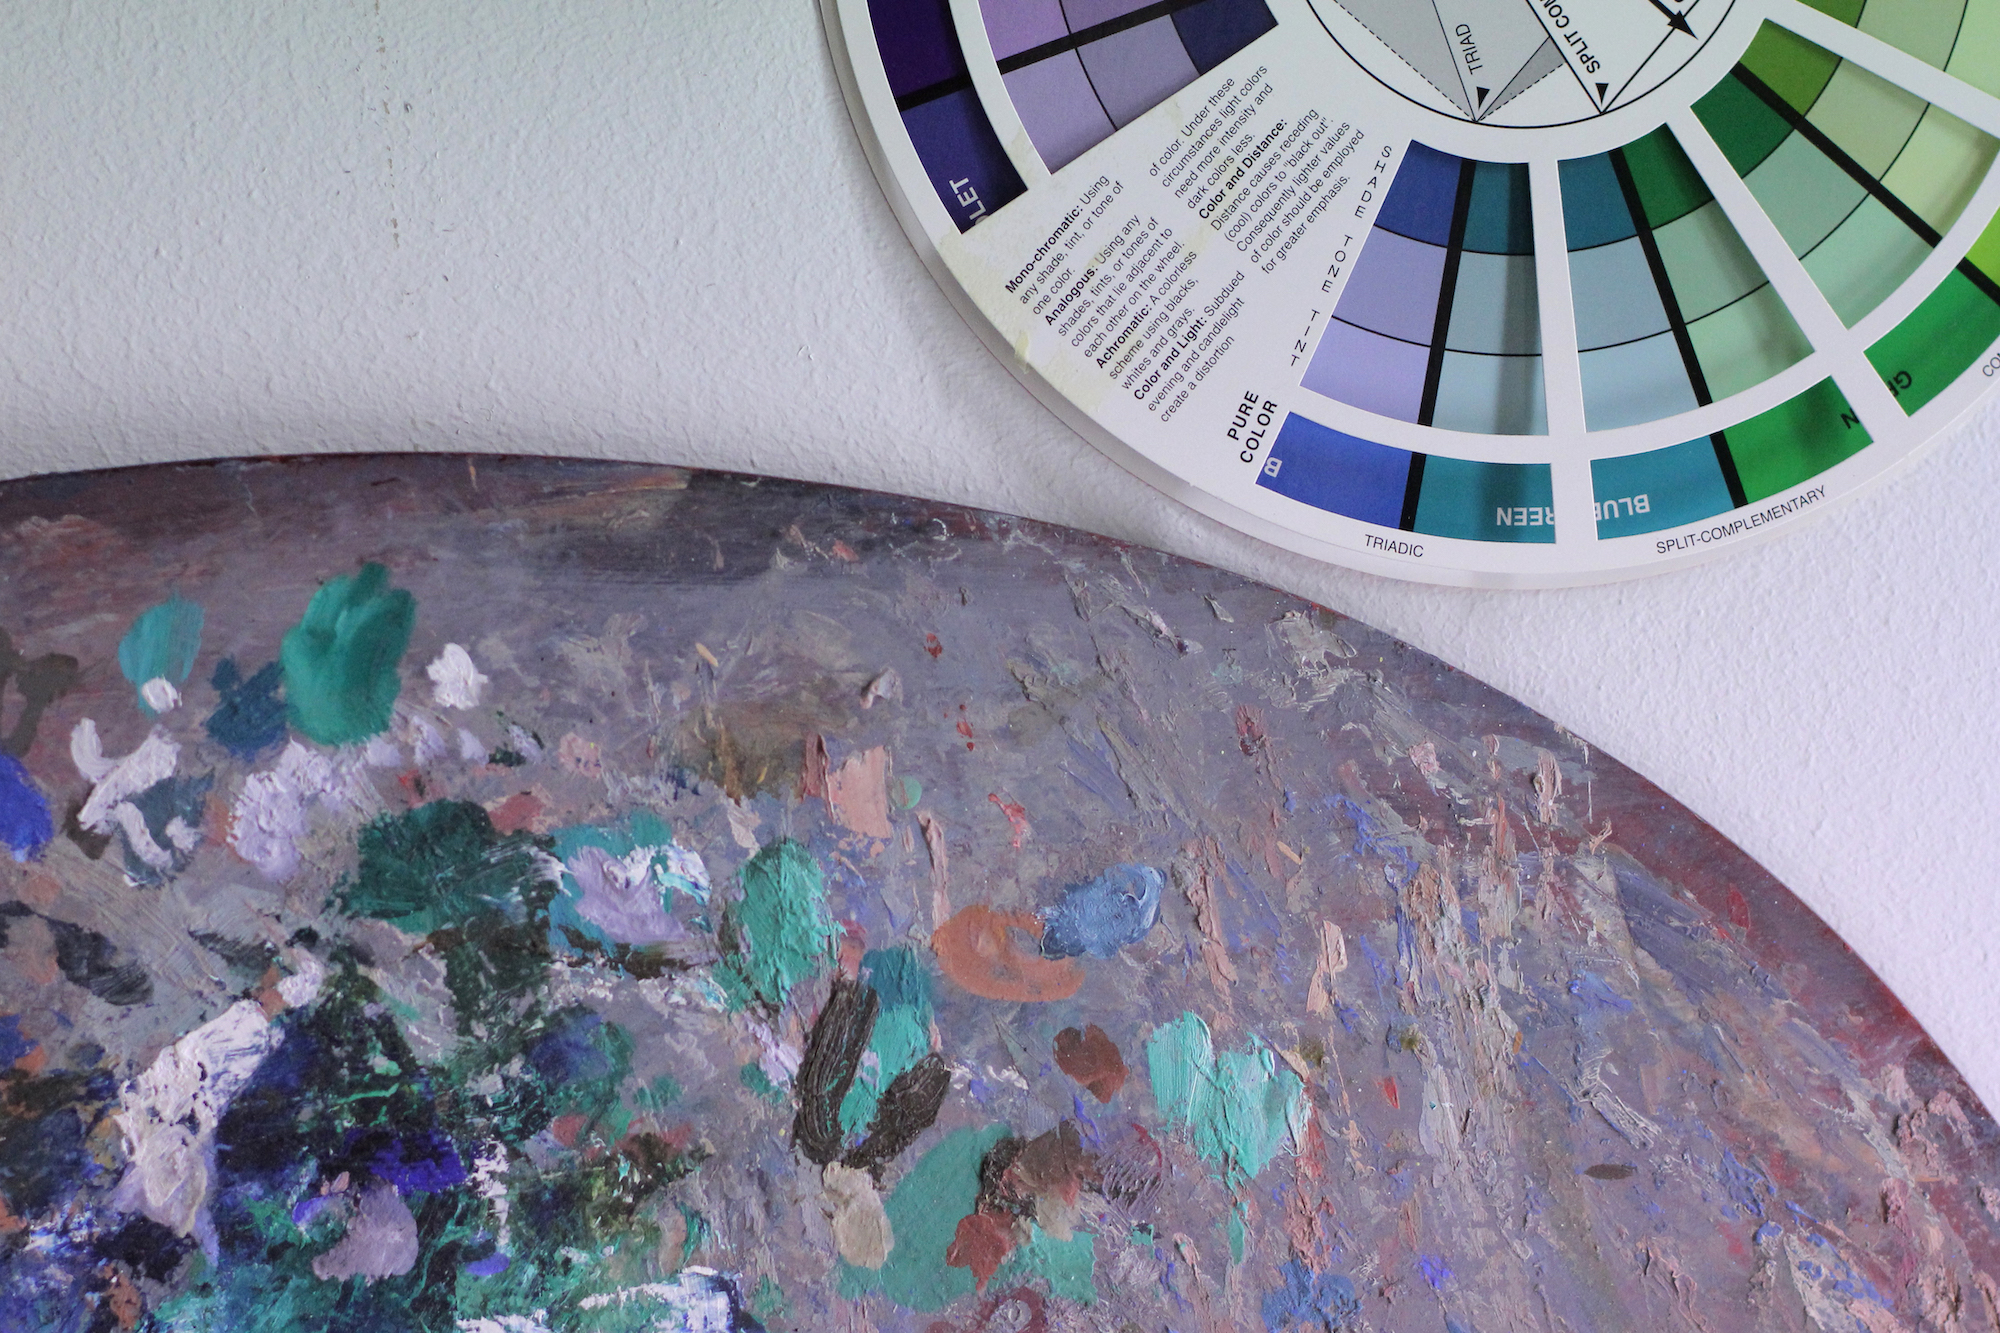 A closeup image of a palette with green, blue, grey and brown paint stains. Next to it is a colour wheel.